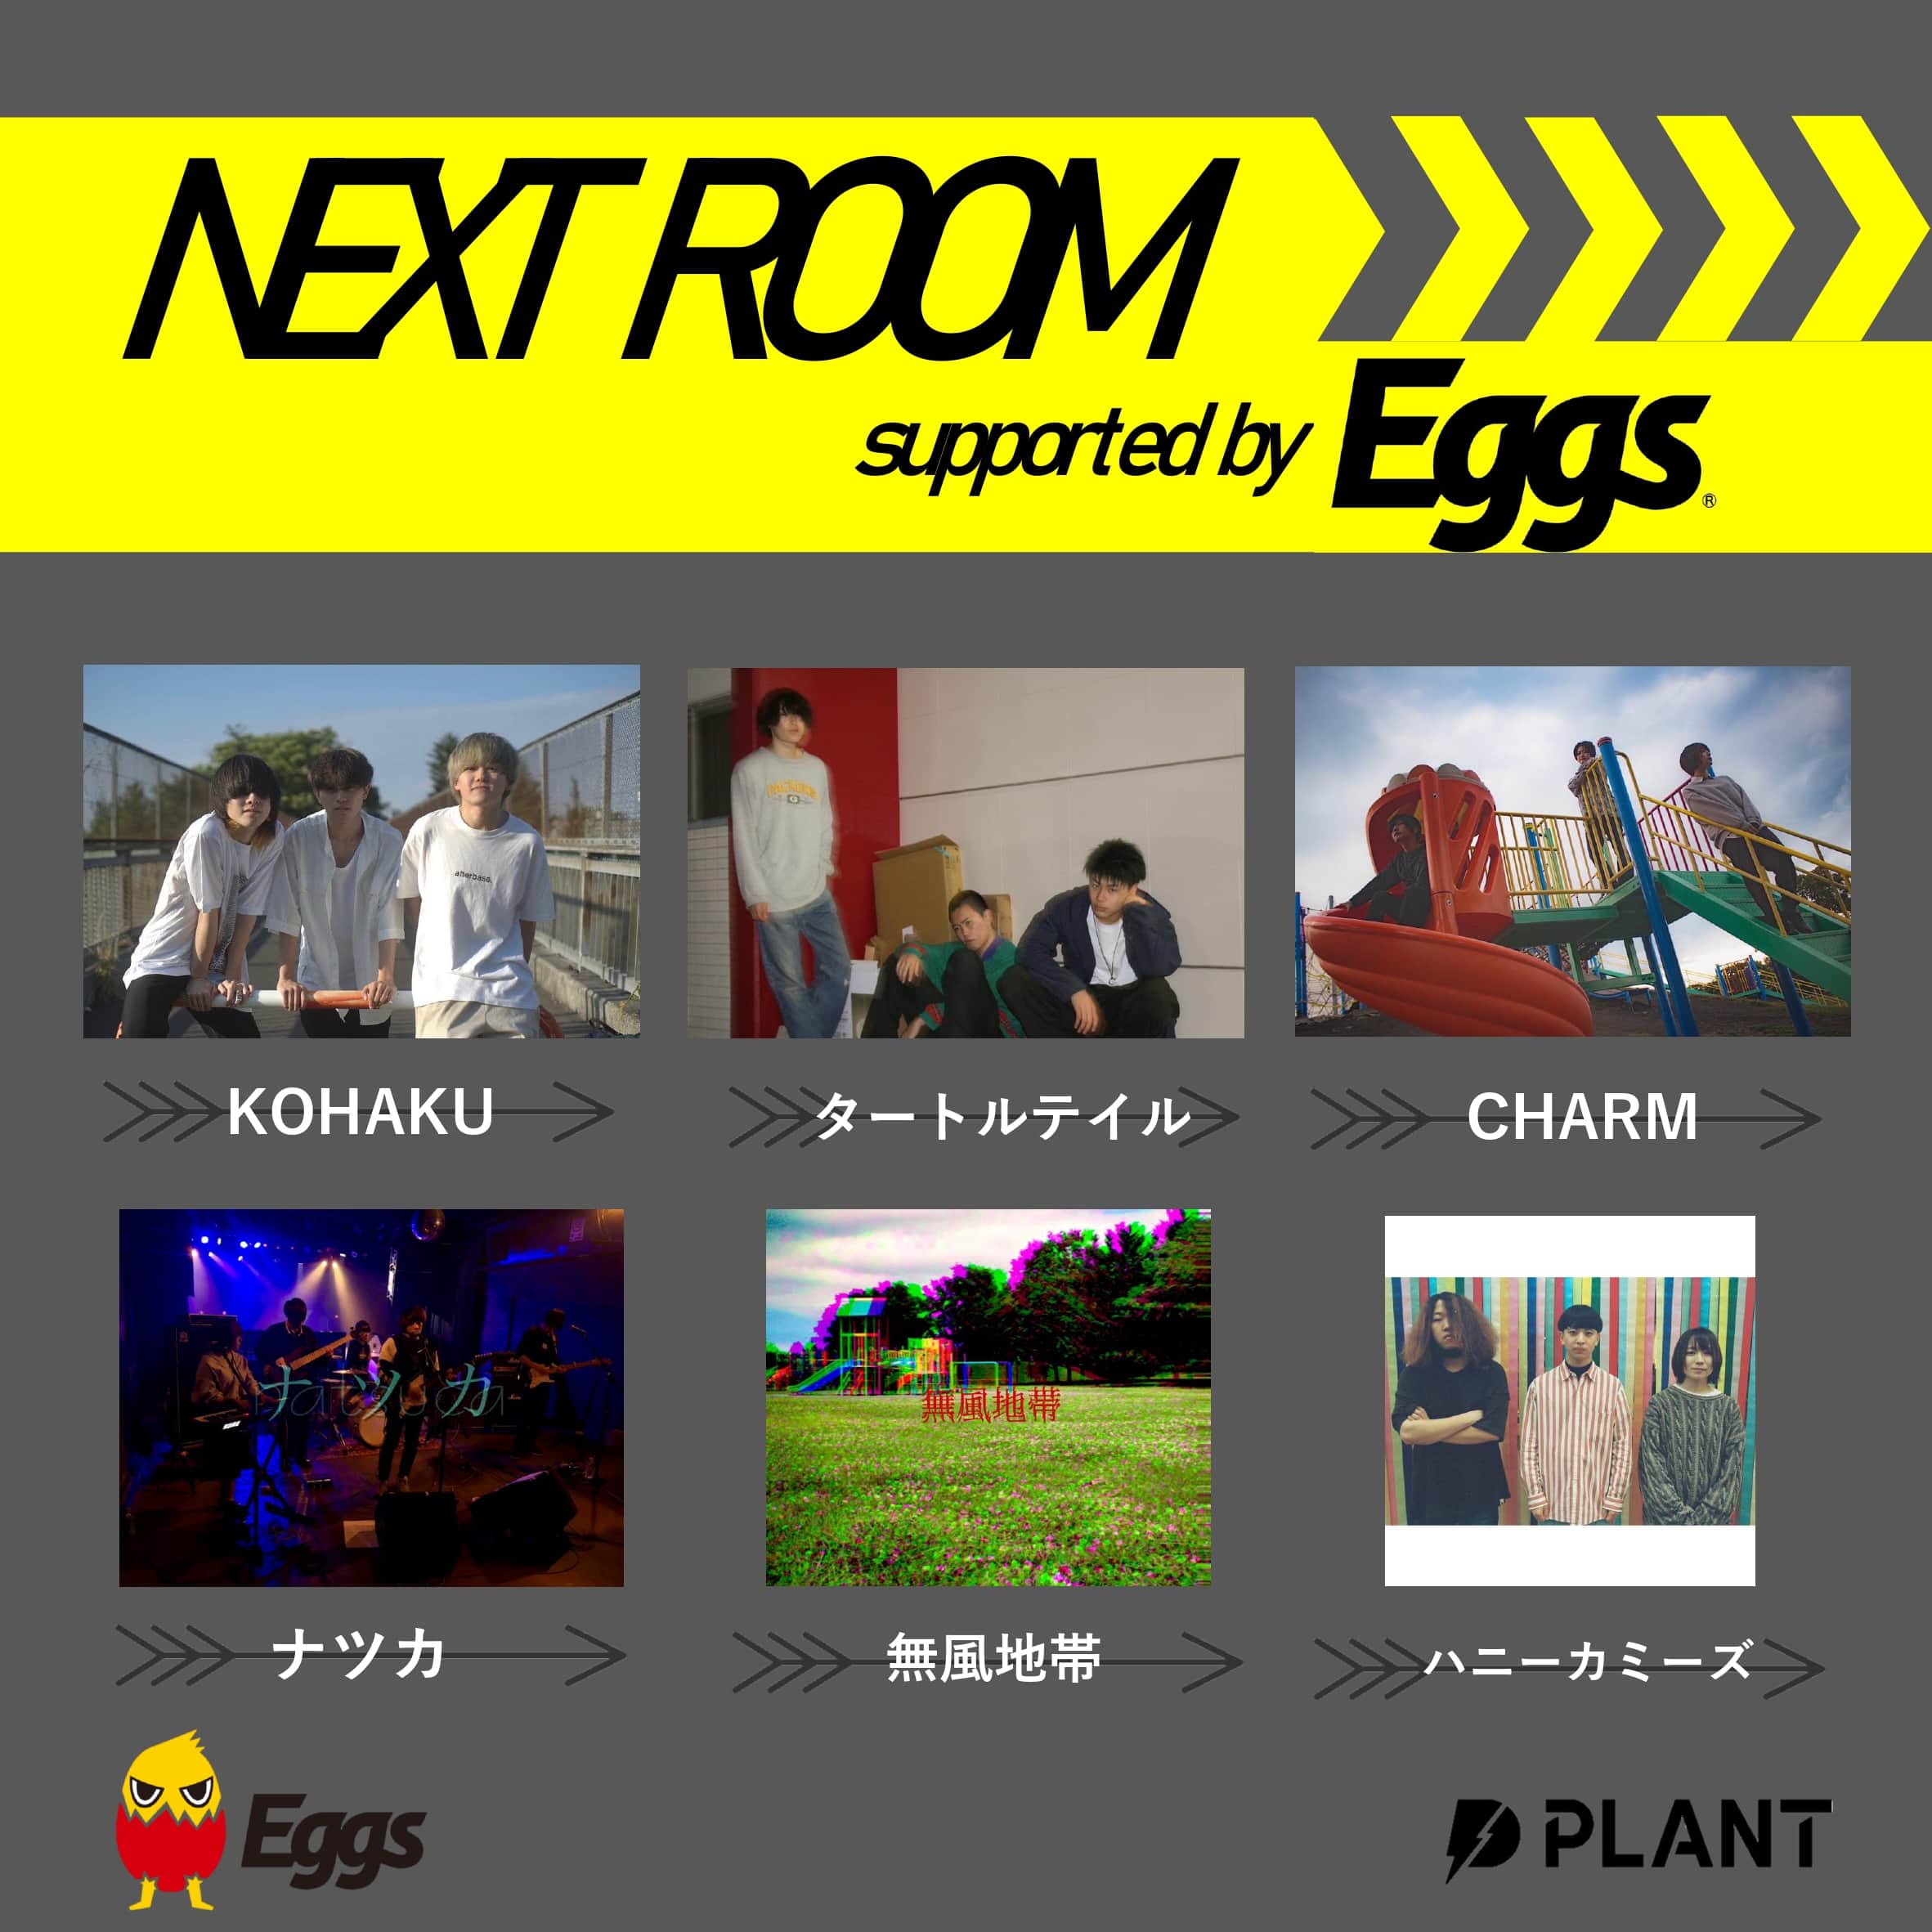 NEXT ROOM supported by Eggs